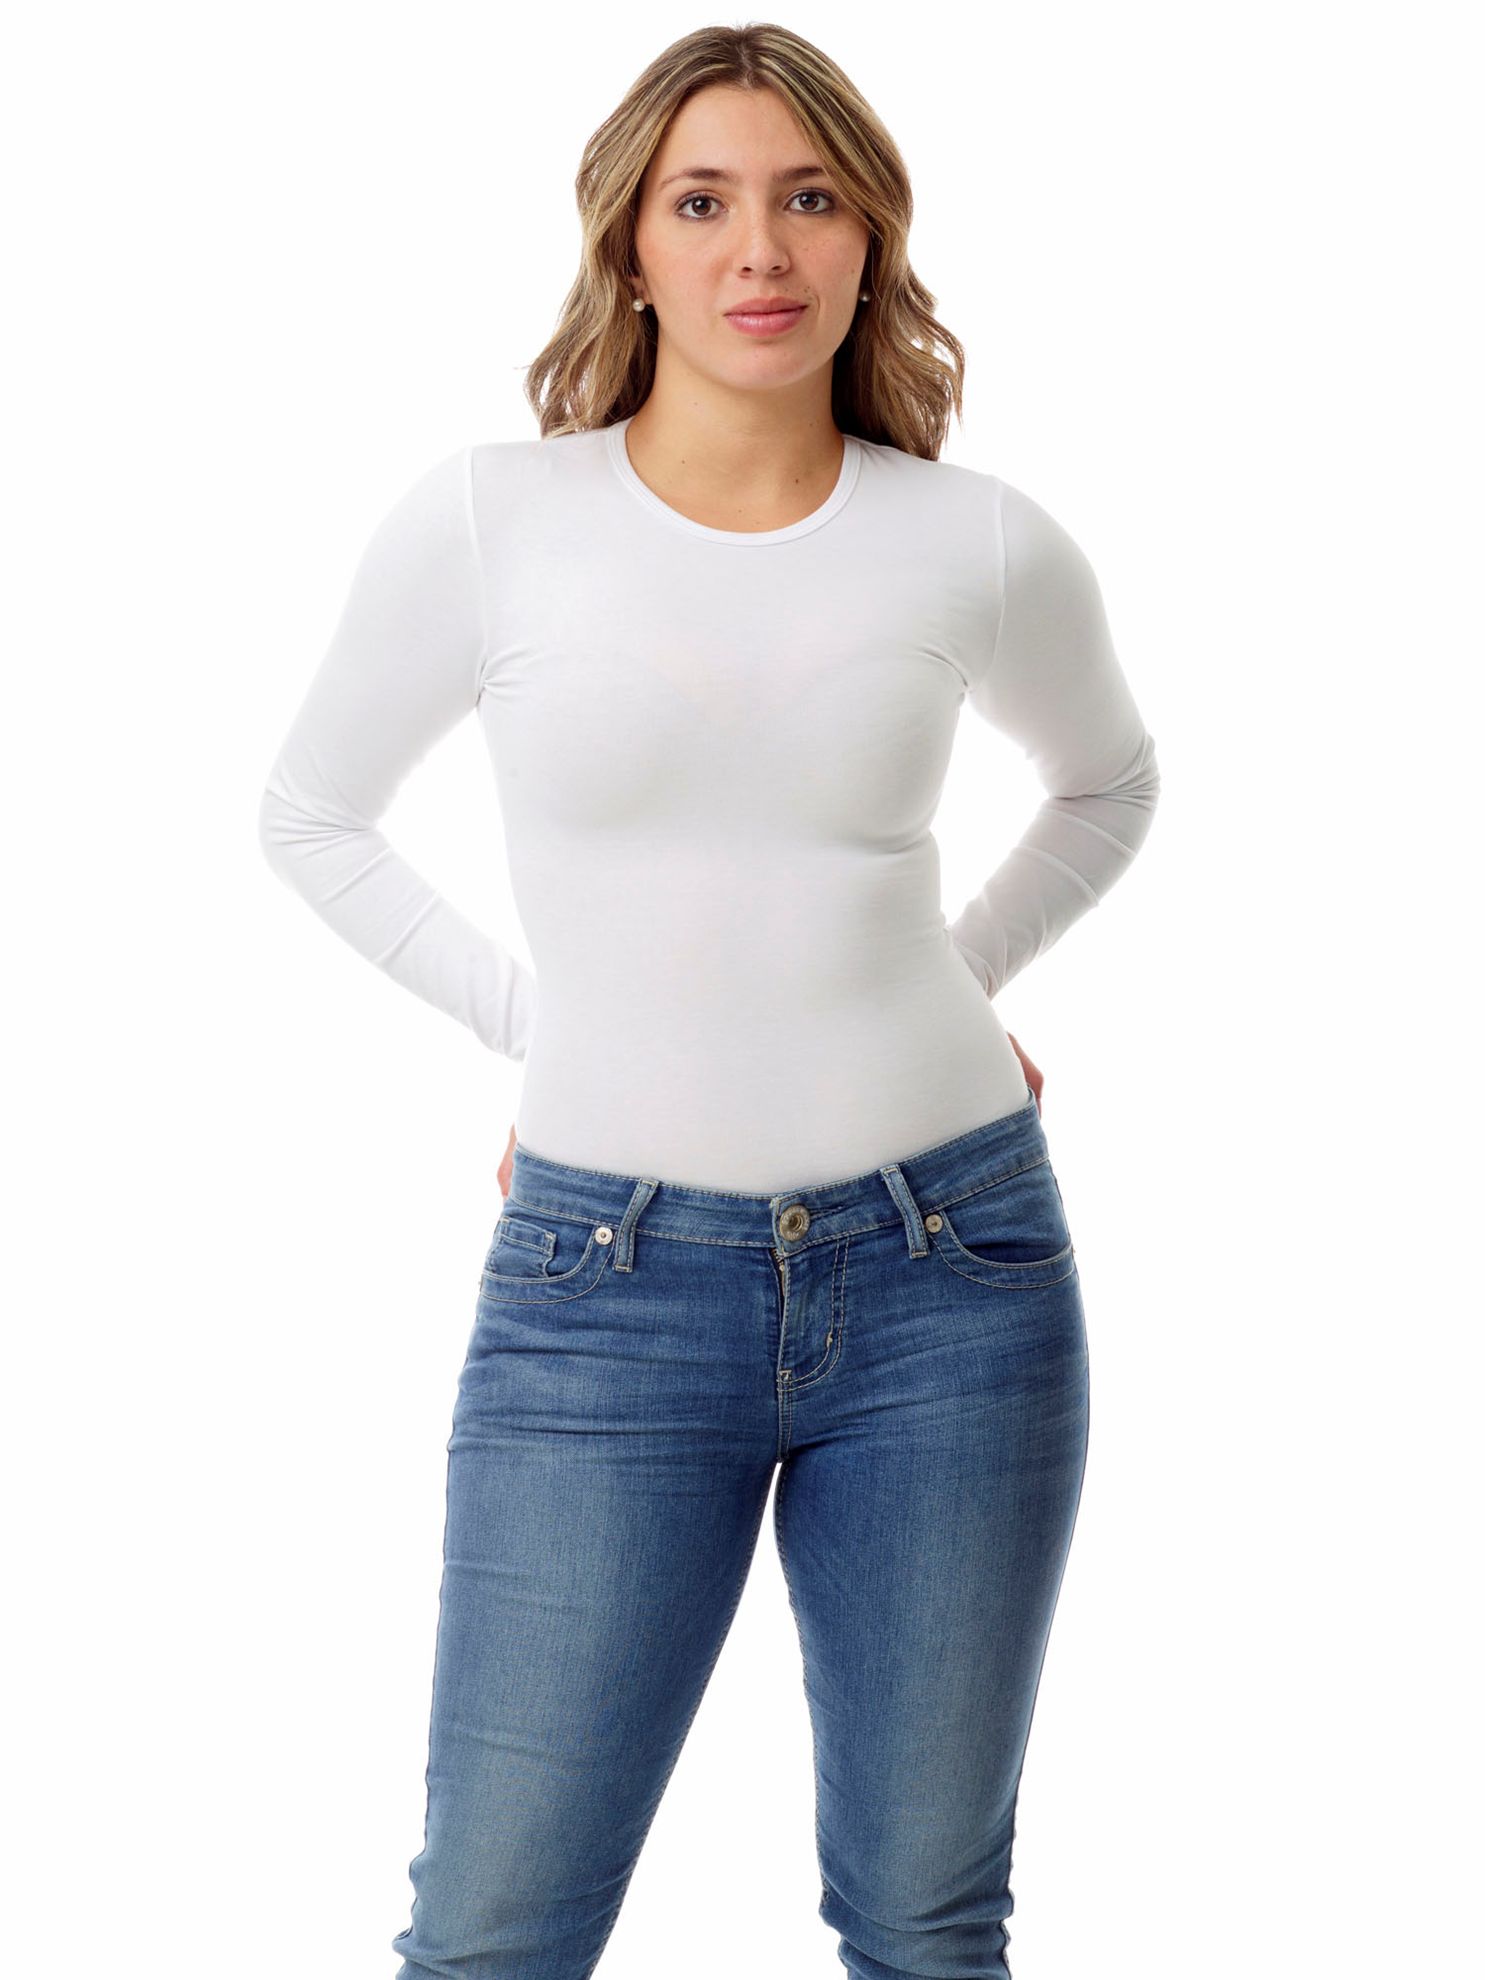 Womens Compression T-shirts Crew Neck Long Sleeve Tops Athletic